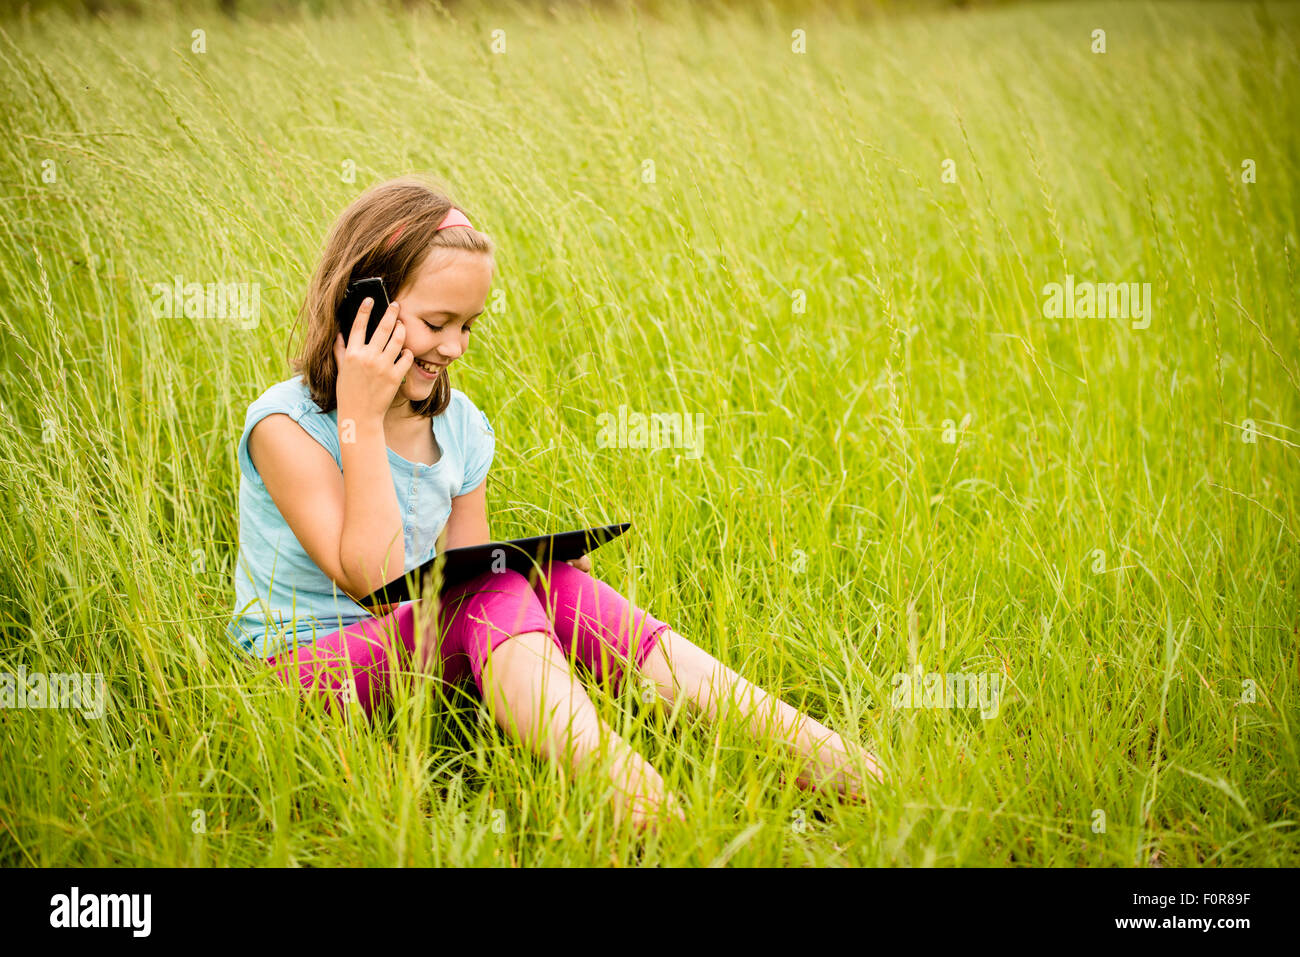 Smiling child watching movie on tablet outdoor in nature Stock Photo